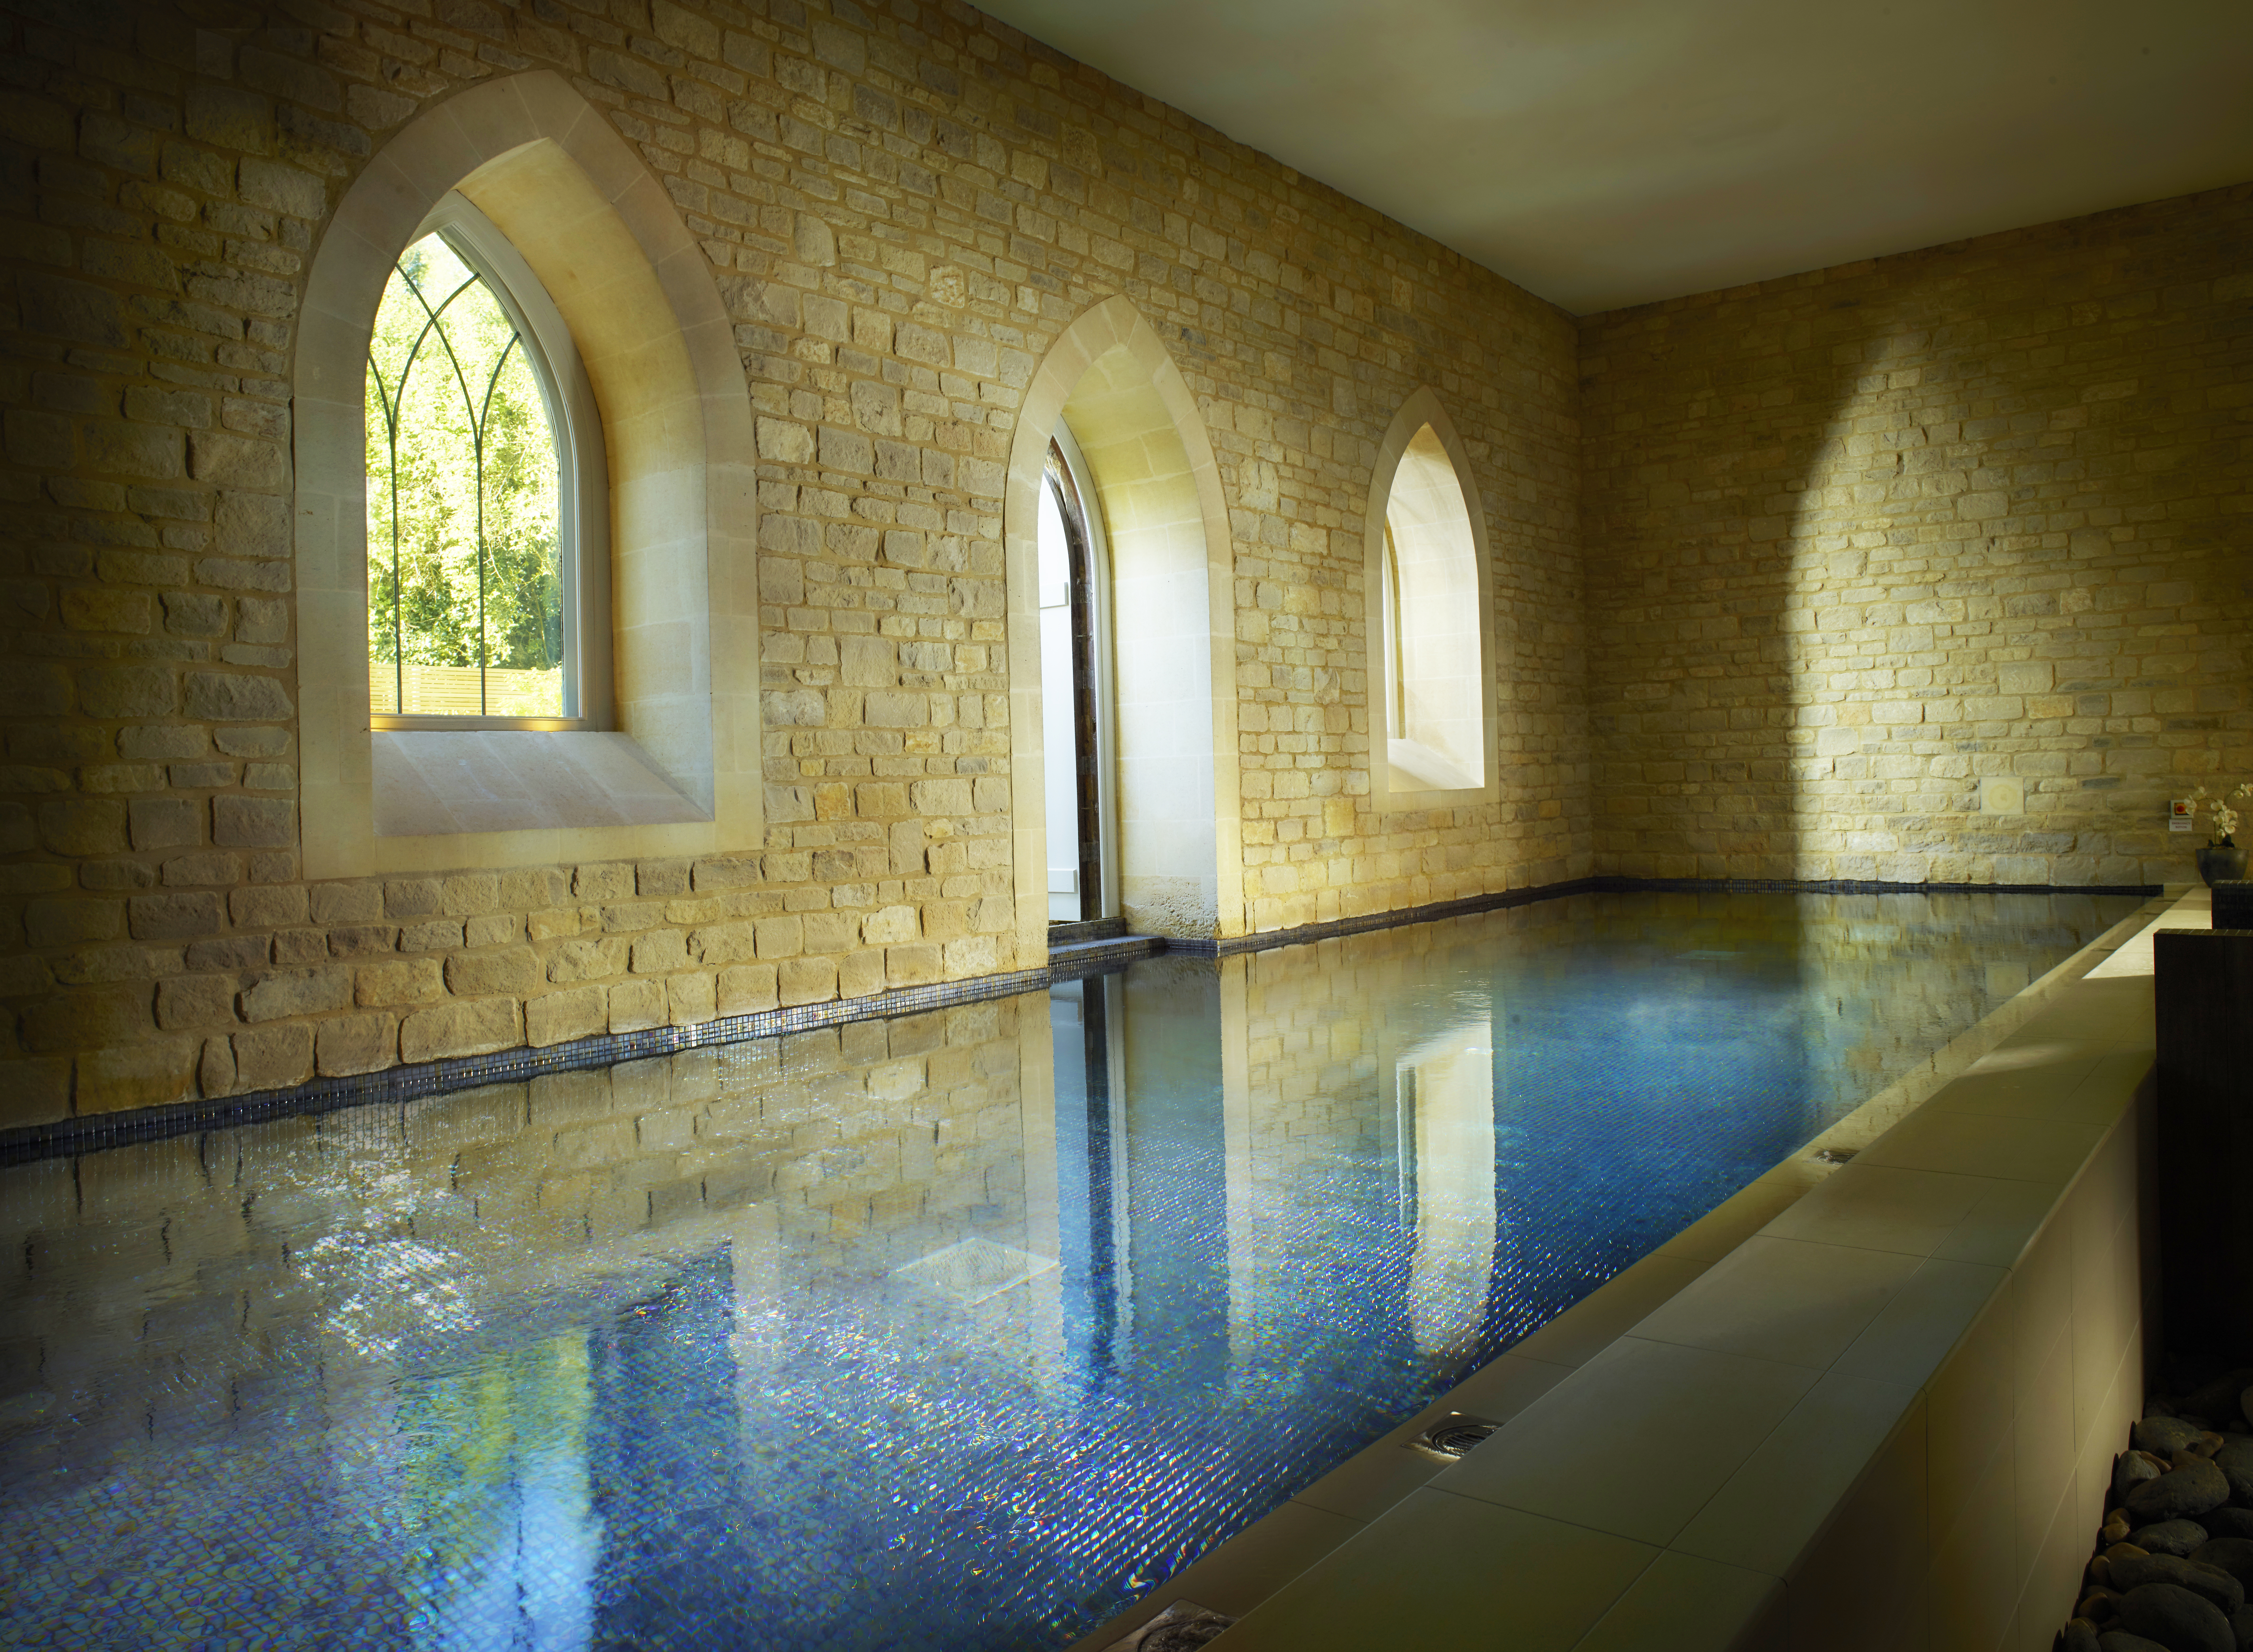 The Serene Day Retreat , The Royal Crescent Hotel And Spa